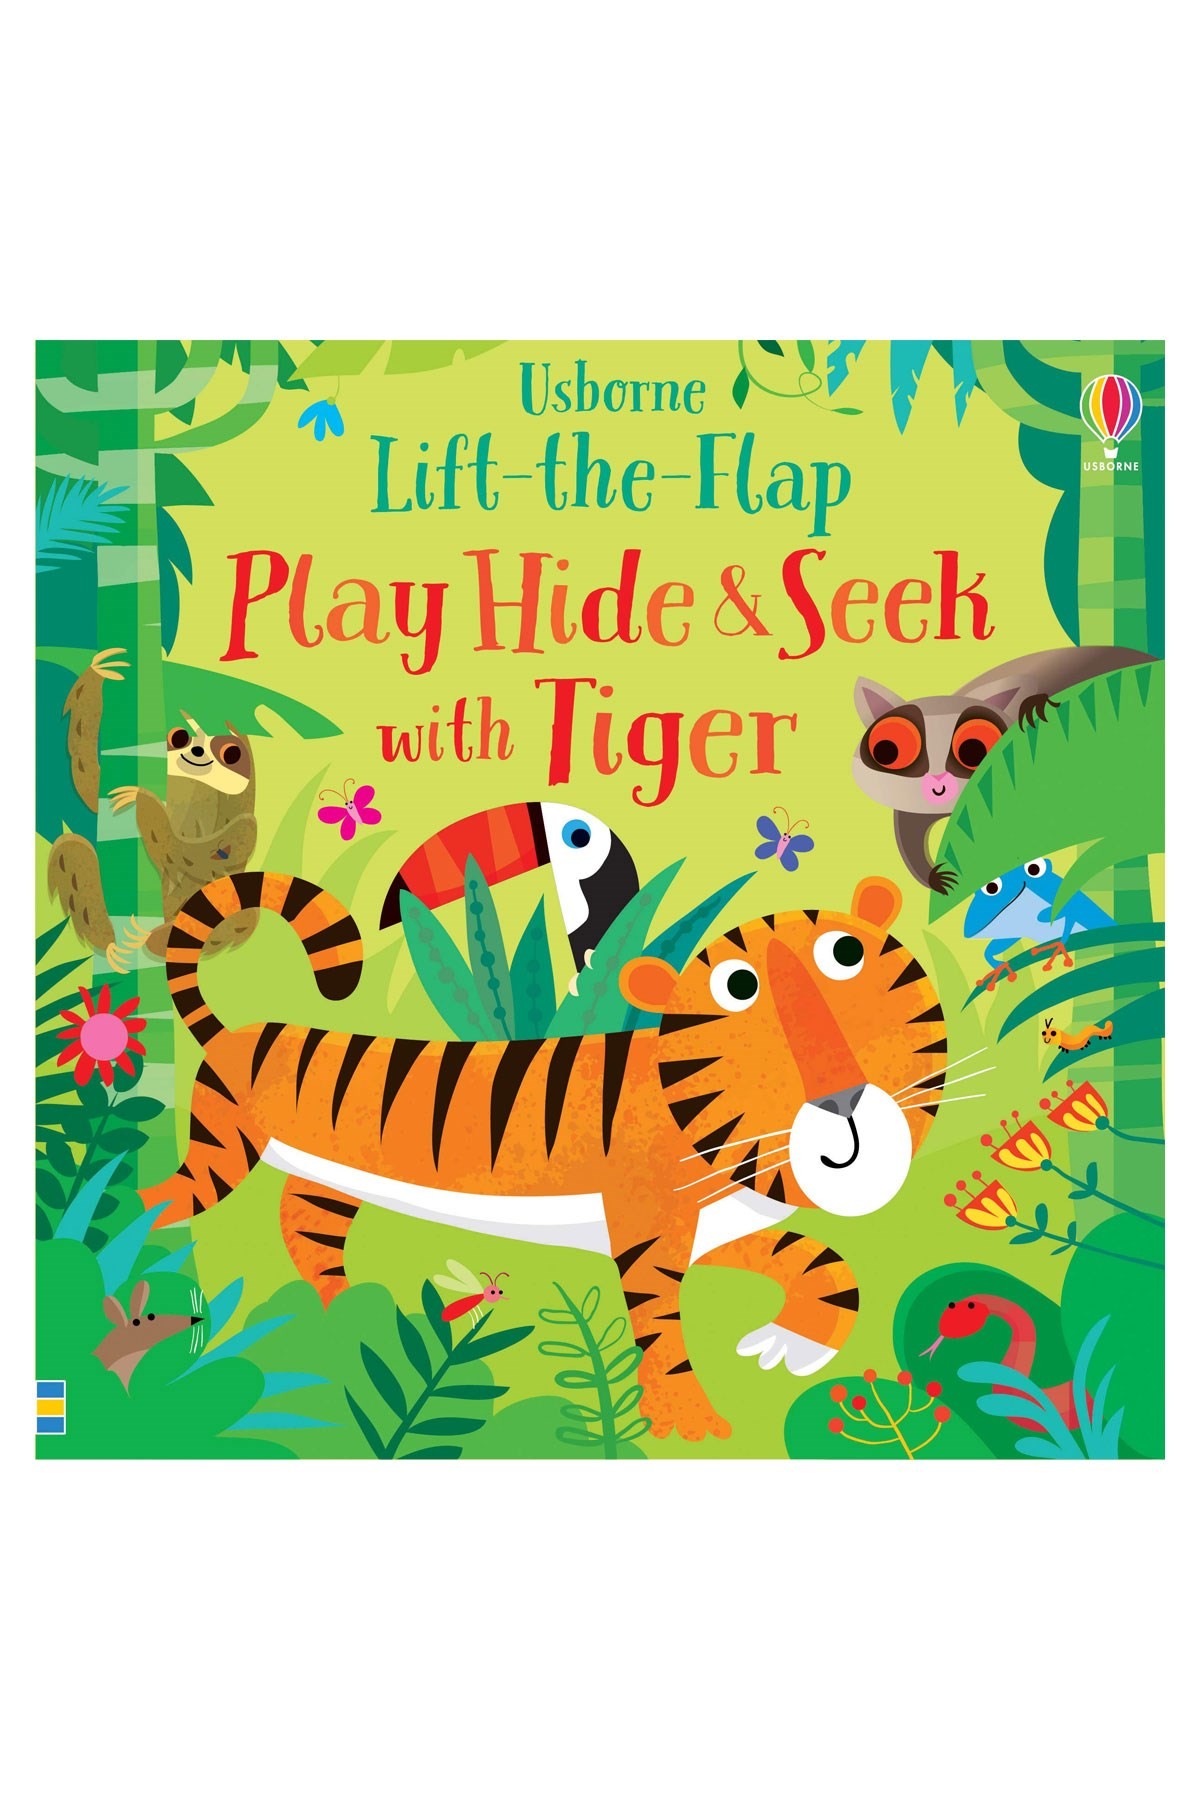 The Usborne Play Hide and Seek with Tiger